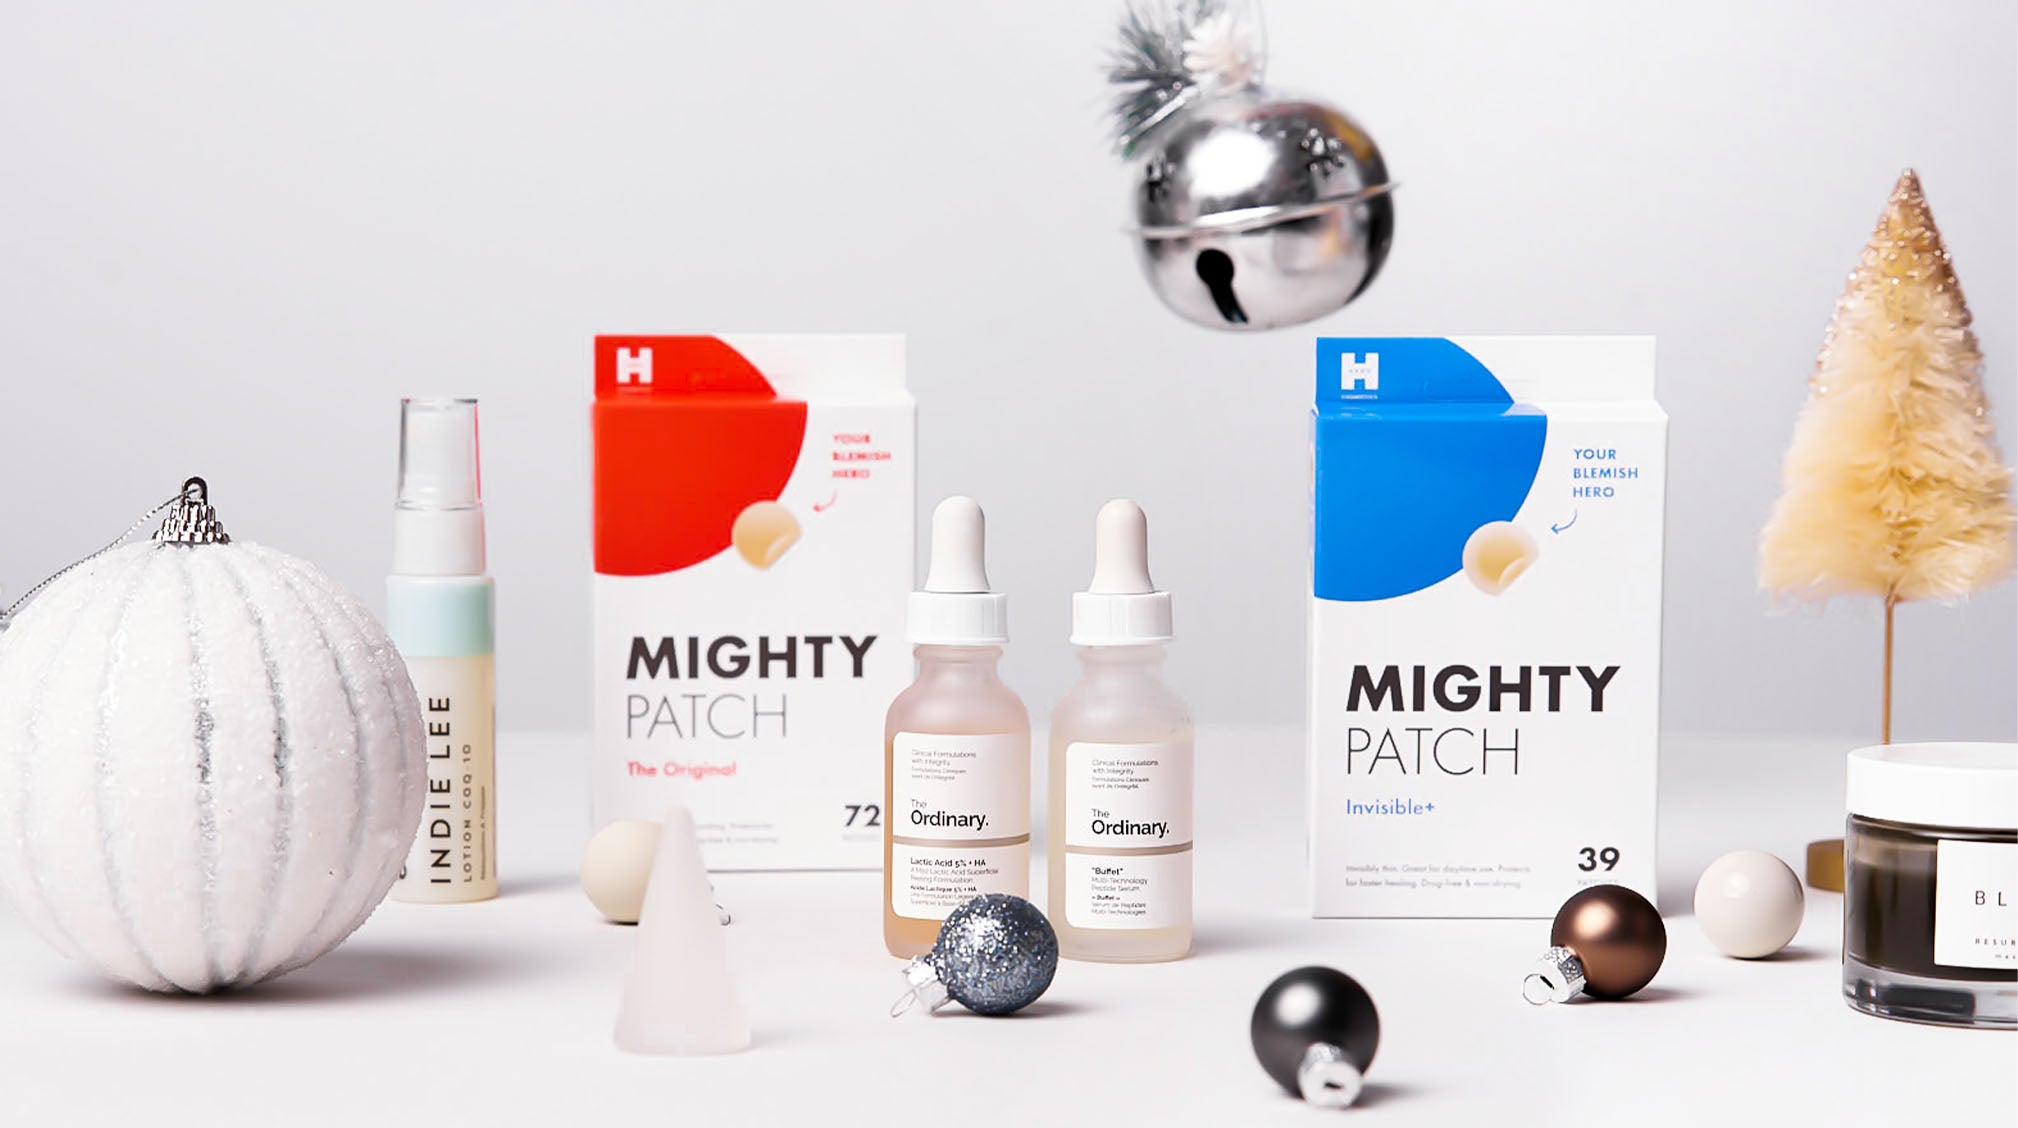 Acne care gifts from Hero Cosmetics, The Ordinary, Indie Lee and Herbivore next to Christmas ornaments